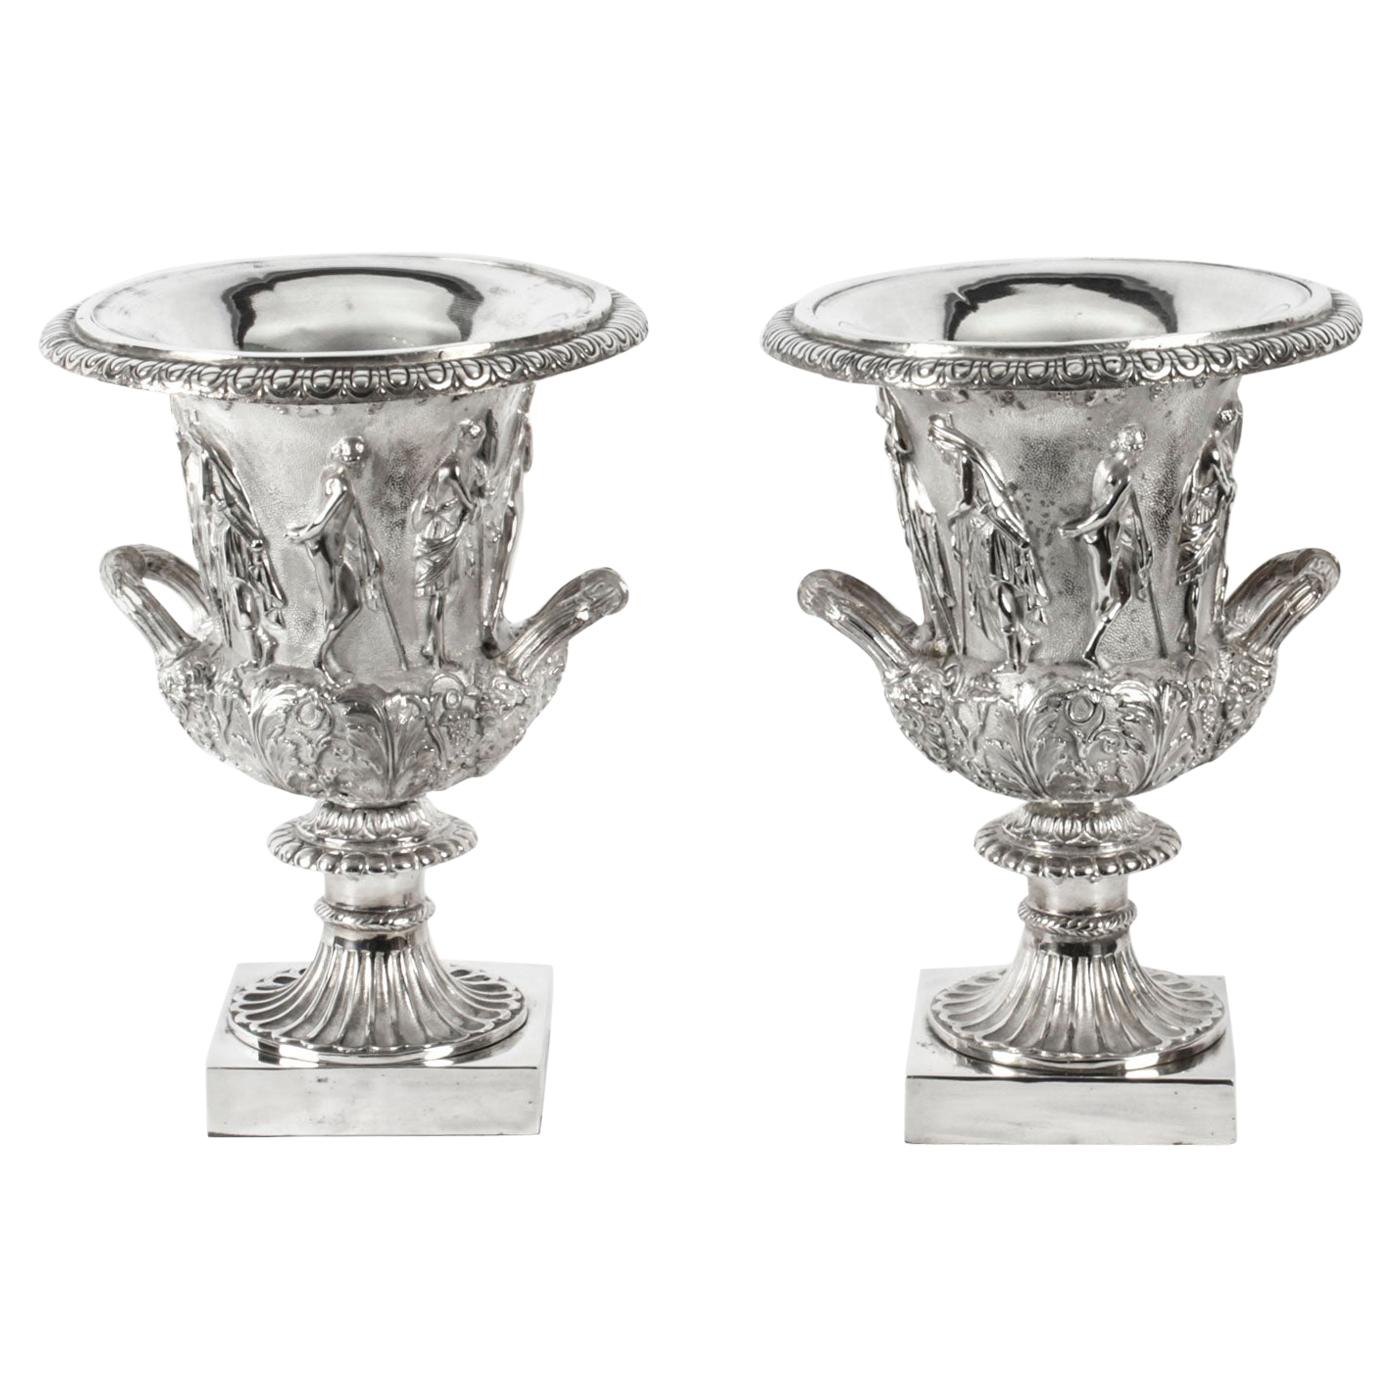 Pair of Silver Plated Grand Tour Borghese Bronze Campana Urns, 19th Century